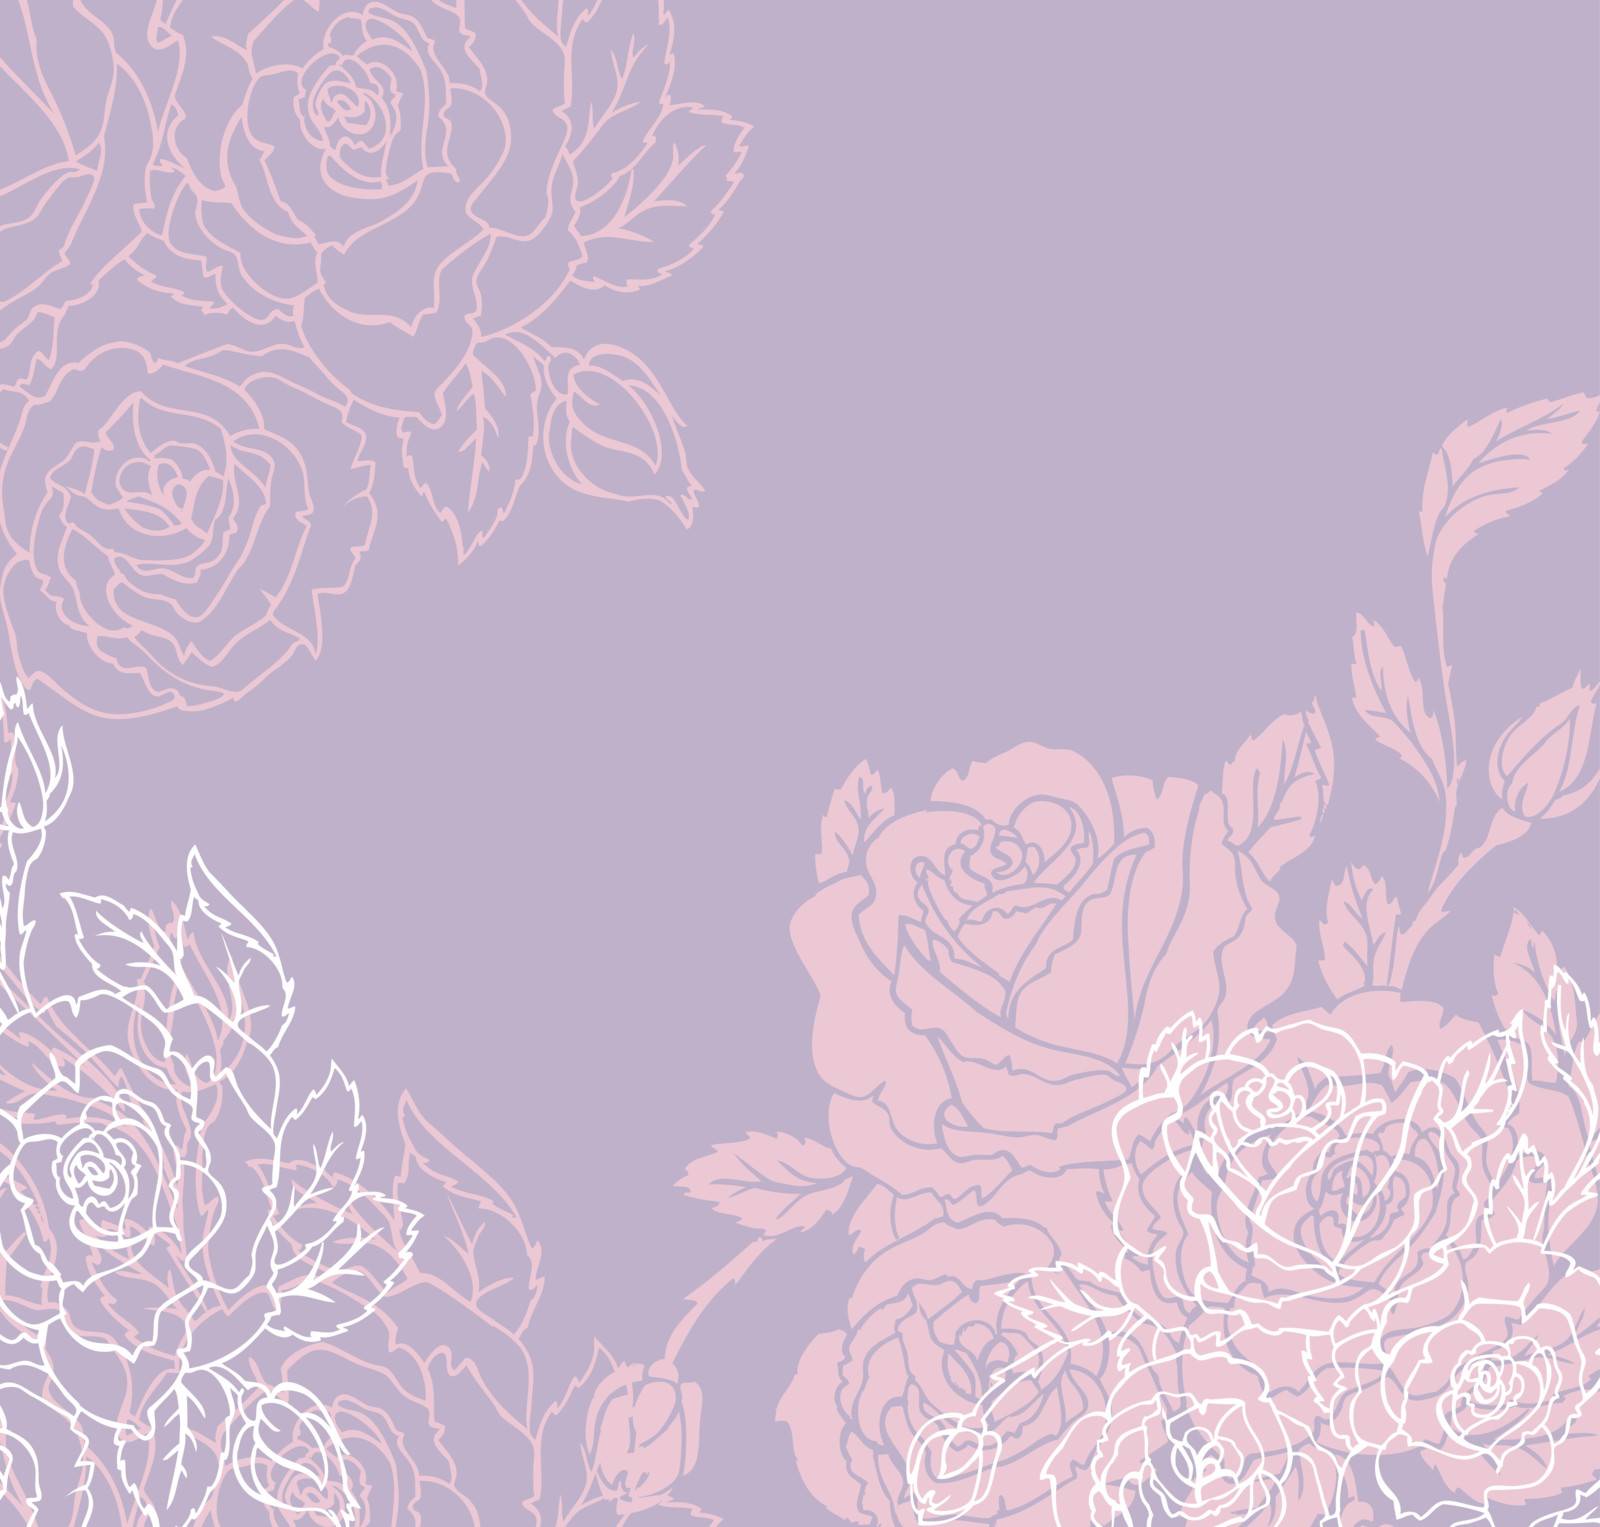 Vector illustration of Background with beauty roses